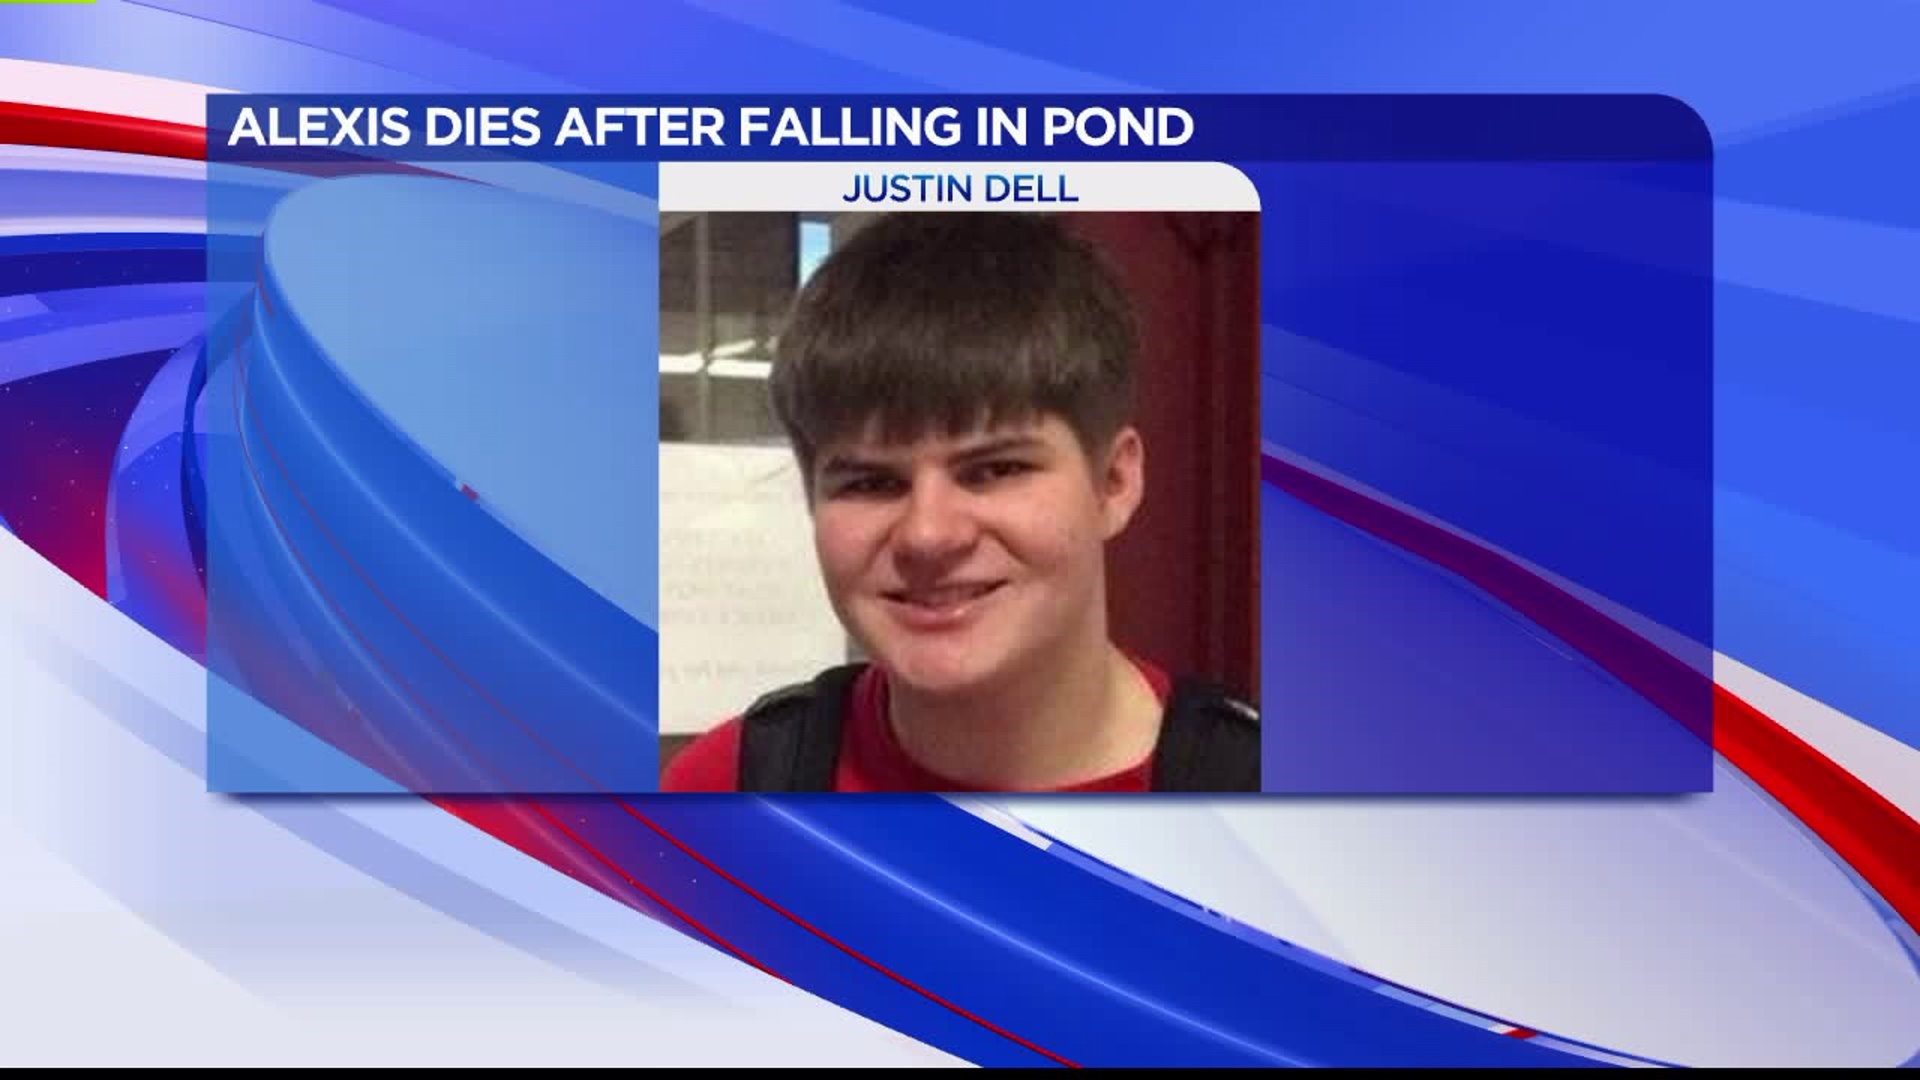 Teen dies after falling into pond in Alexis IL